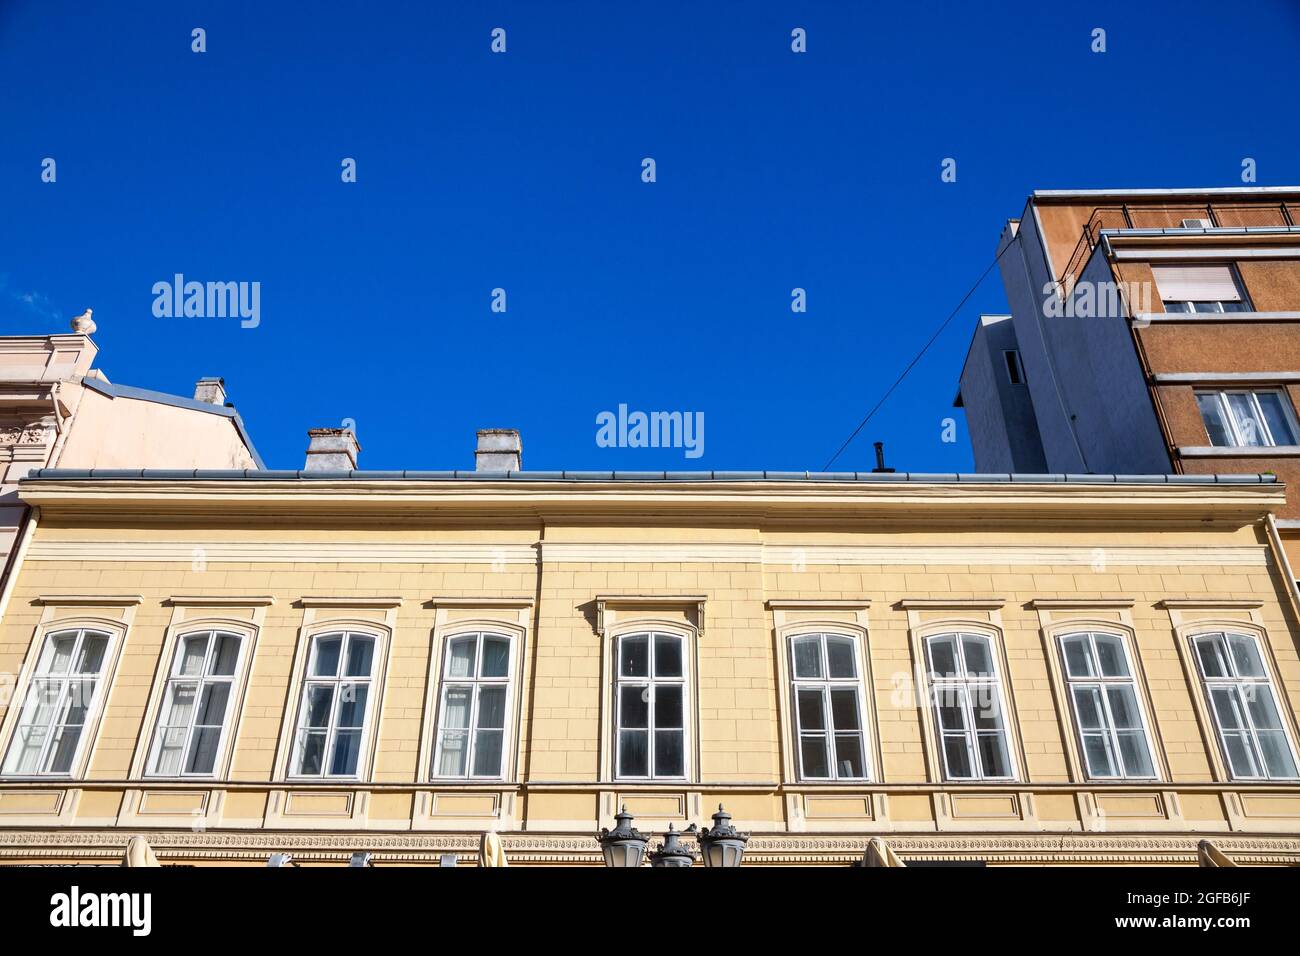 Picture of facades in the old town of Belgrade, Serbia, called stari grad, abiding by the rules of Austro-Hungarian architecture. The old town of Belg Stock Photo